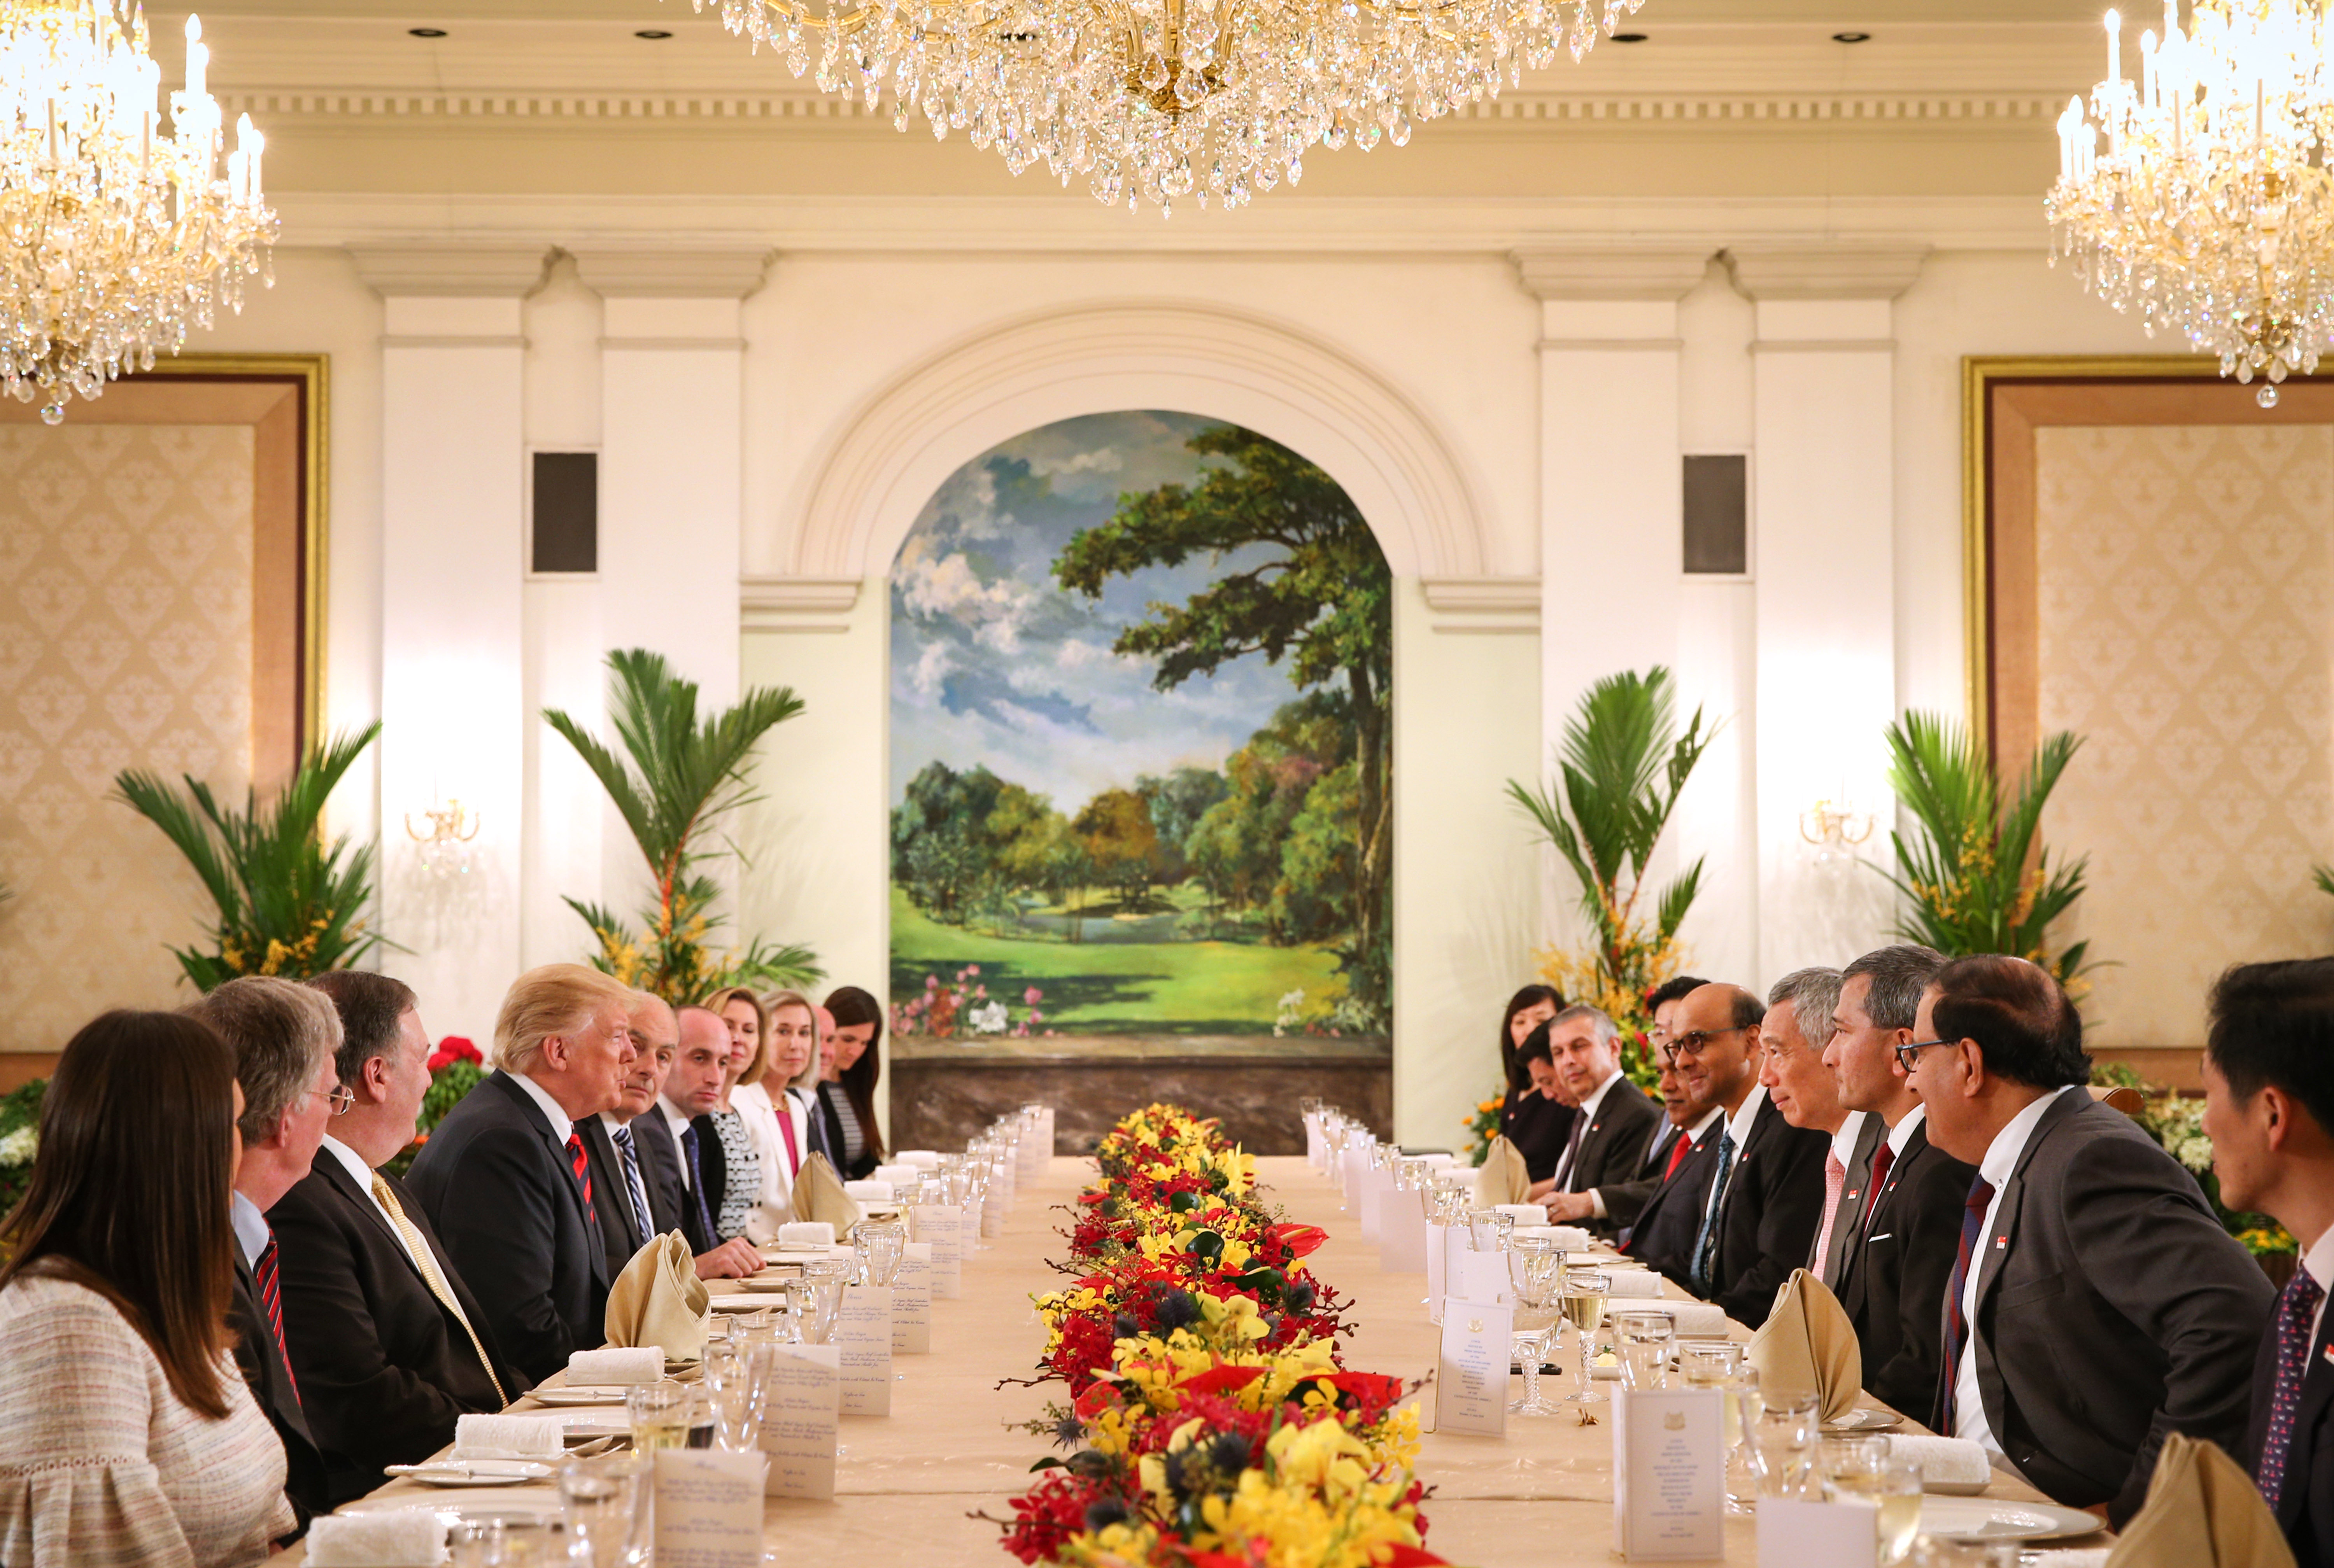 PM Lee Hsien Loong meeting US President Donald Trump on 11 Jun 2018 (MCI Photo by Terence Tan)